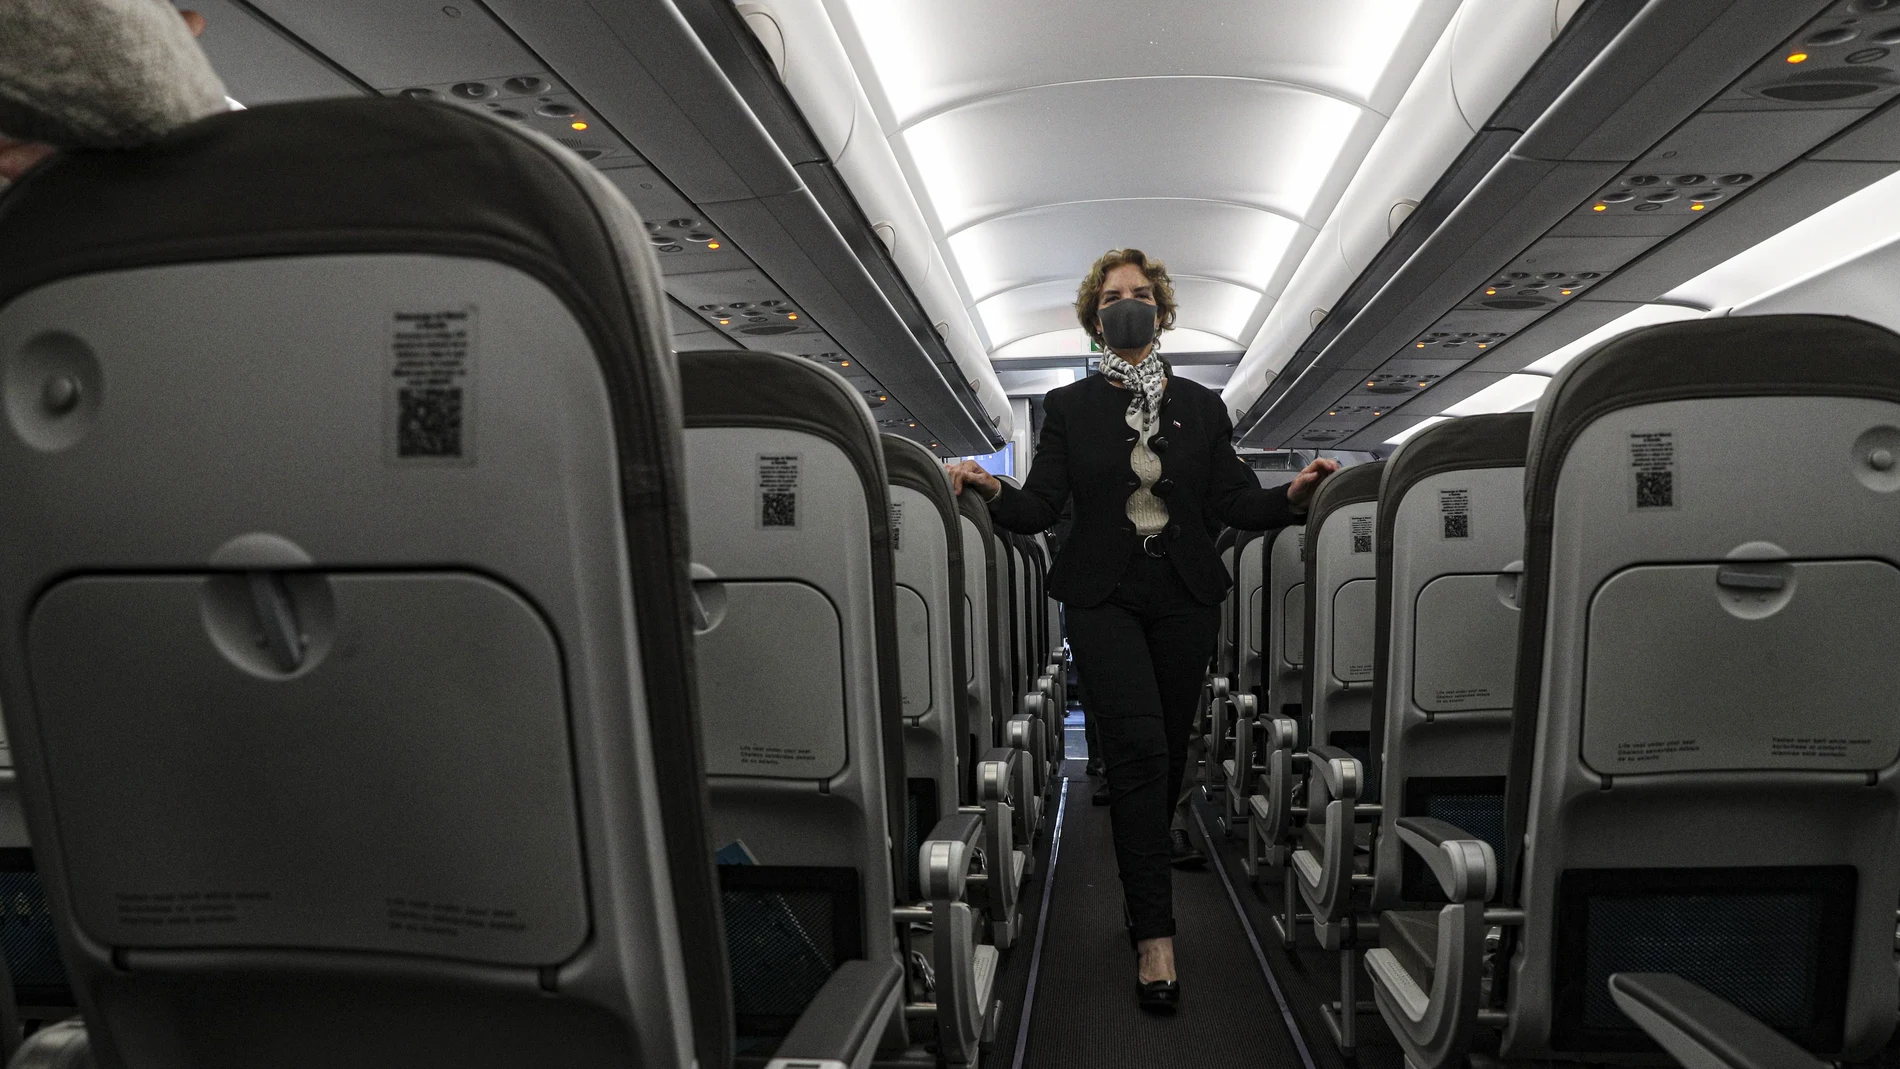 Transportation and Communications Minister Gloria Hut walks inside a Jet Smart plane during a photo opportunity after her press conference announcing the reopening of the Arturo Merino Benitez International Airport amid the COVID-19 pandemic in Santiago, Chile, Friday, Nov. 13, 2020. Hut announced that starting Nov. 23, non-resident passengers who bring a negative COVID-19 test will be allowed to fly to Chile. (AP Photo/Esteban Felix)